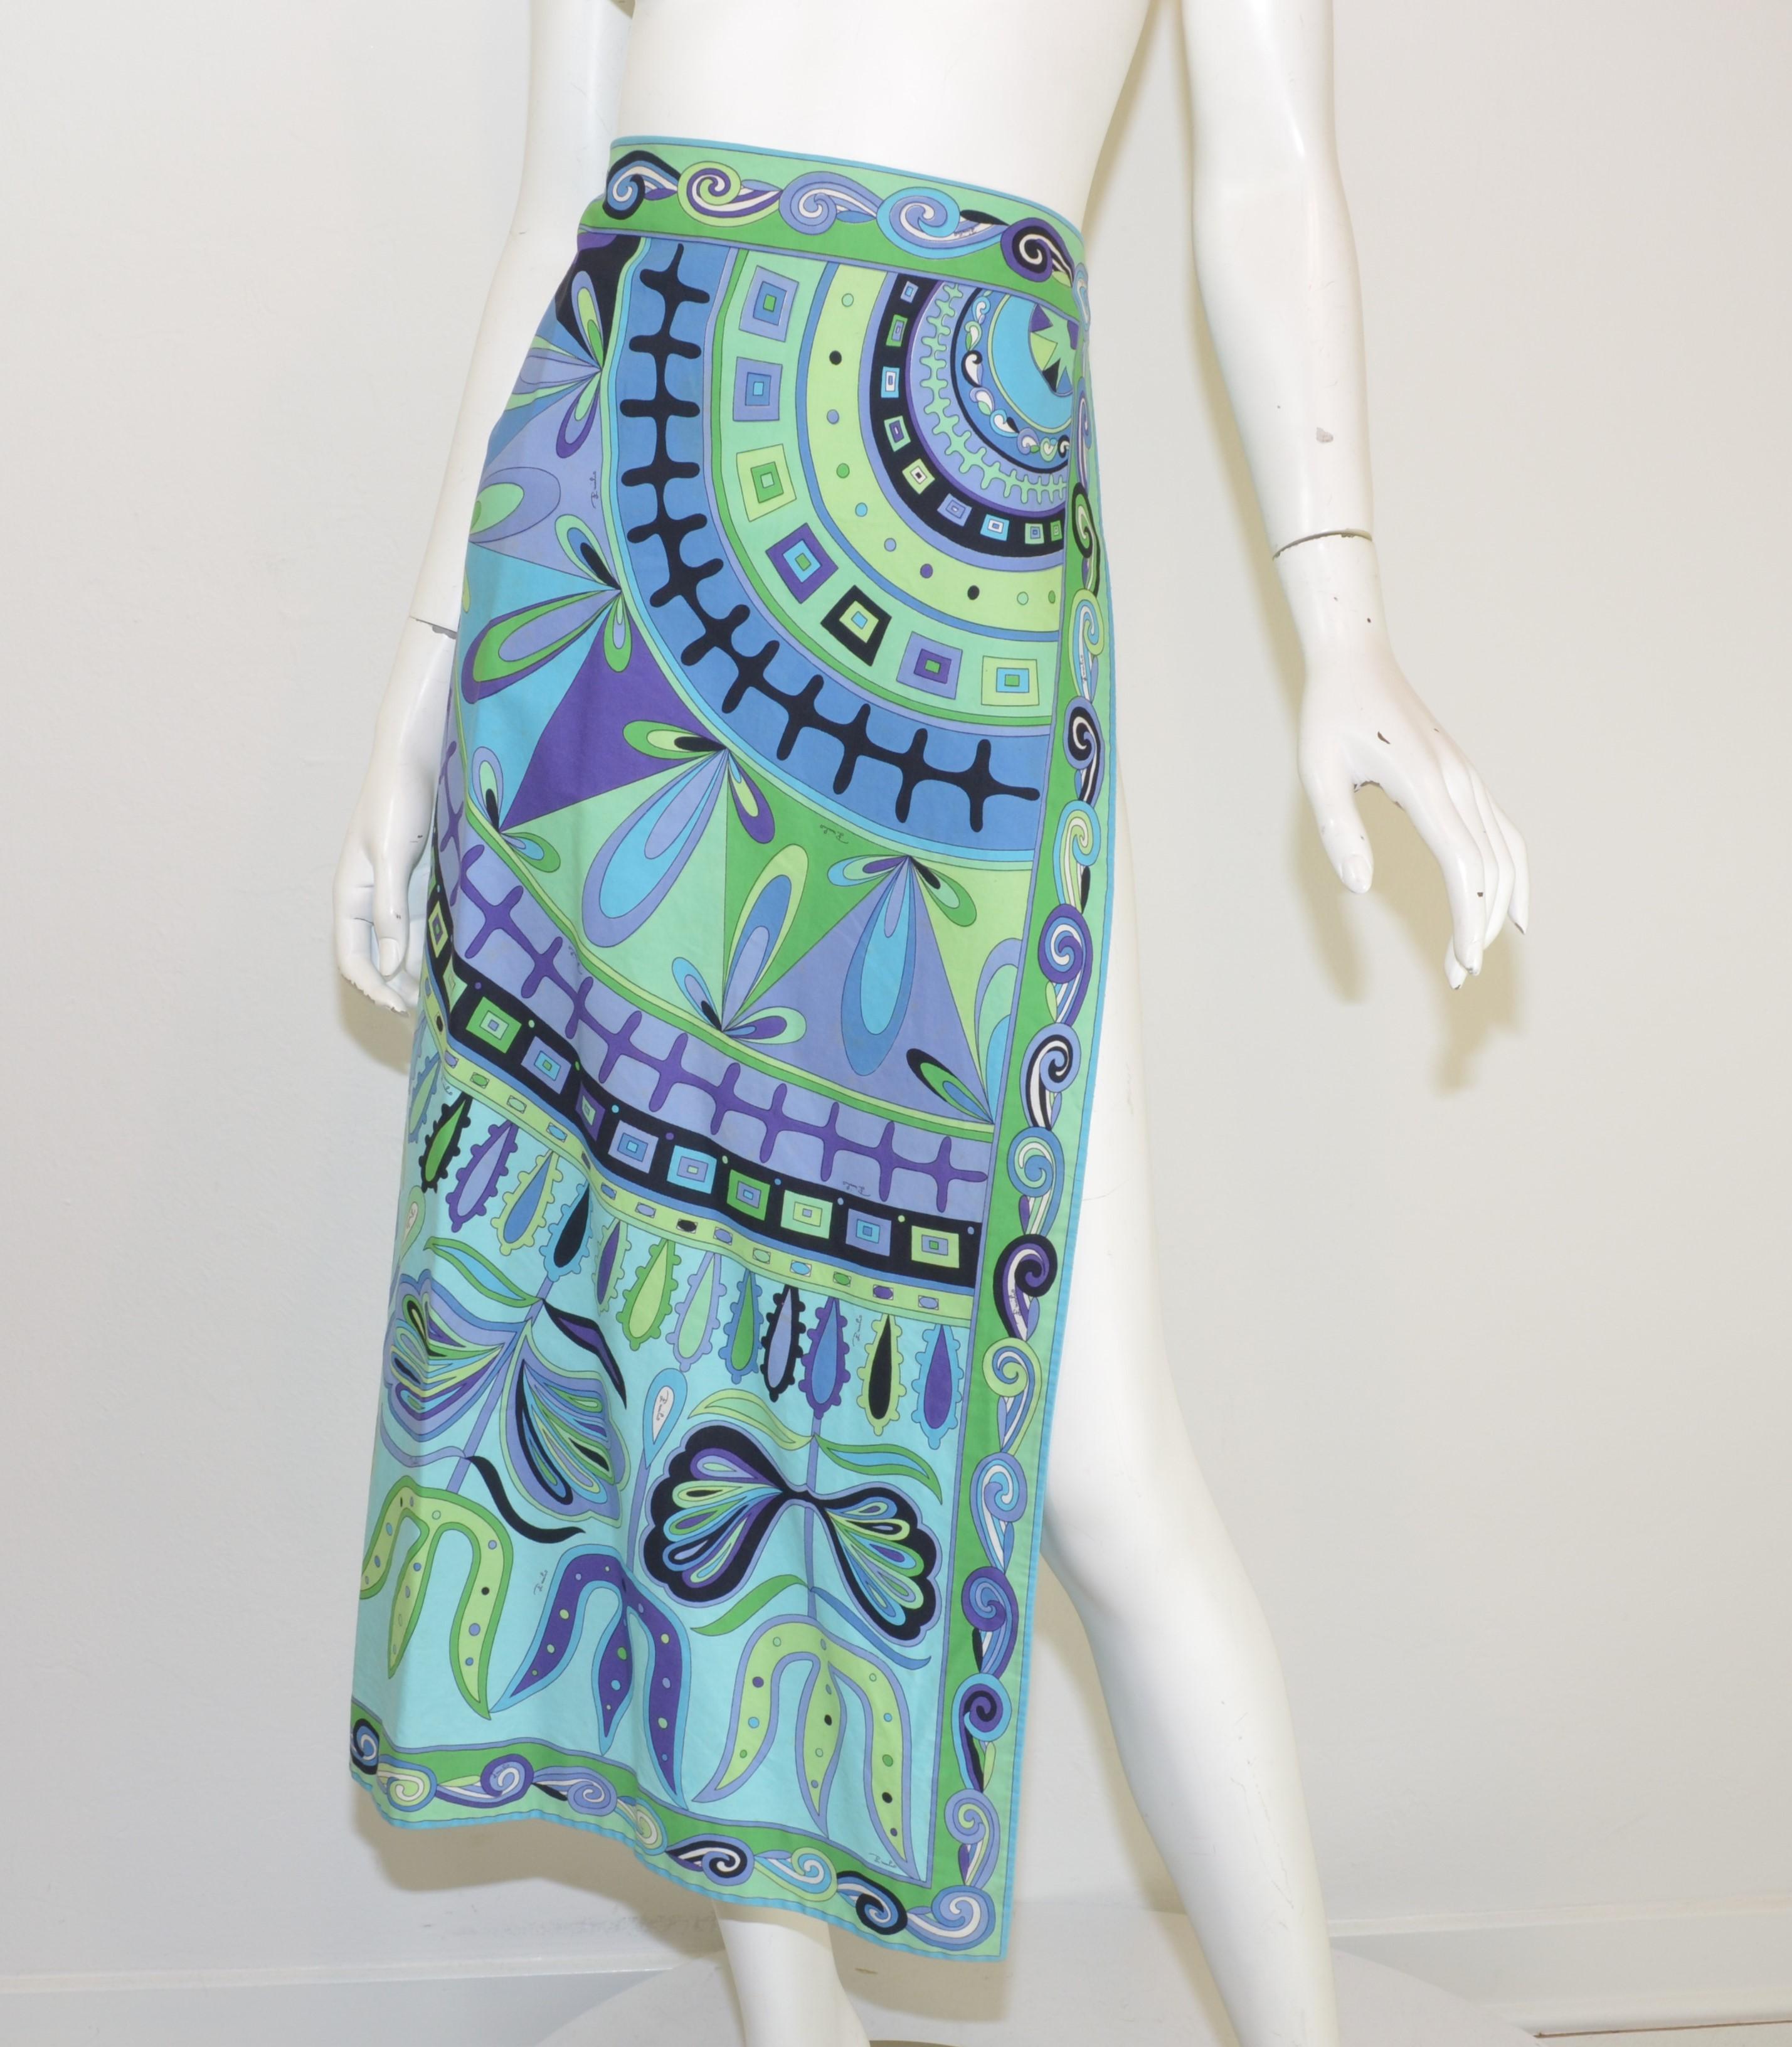 Emilio Pucci Vintage Skirt is featured in a beautiful print in blue, green, and purple hues. Skirt has a high slit along the left thigh and hook-and-eye closures. Labeled size 8, made in Italy.

Measurements:
Waist 28”
Hips 30”
Length 35”